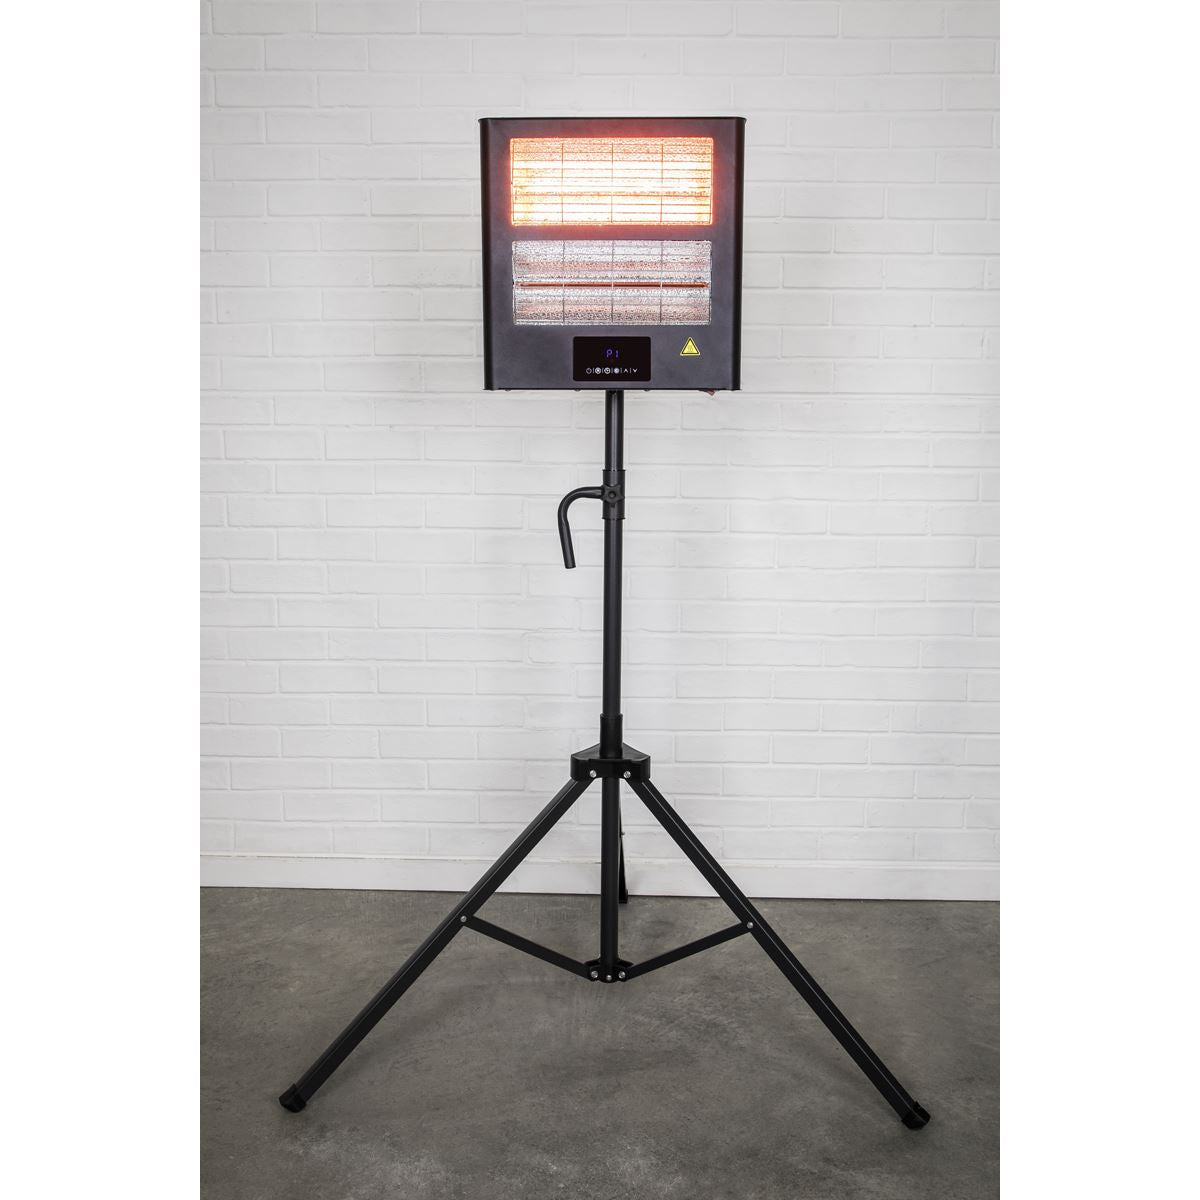 Sealey Infrared Quartz Heater with Tripod Stand 230V 1.4/2.8kW